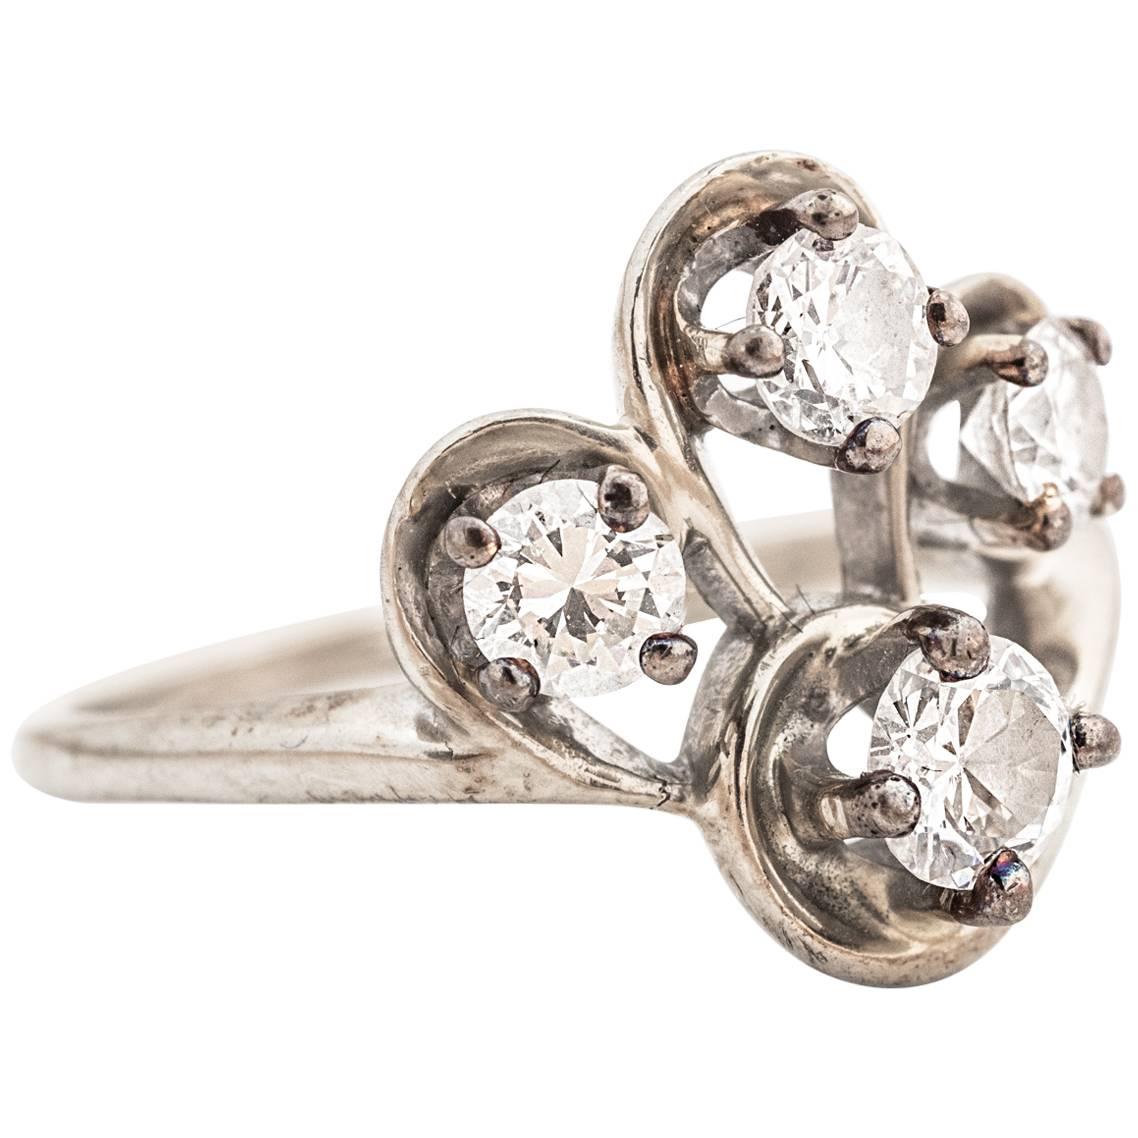 This retro ring features four diamonds cut in the Old European and Transitional Round fashion. Each diamond is entirely visible due to the elevated four-prong frames. The prongs are mounted on four swirled white gold sets, which give this ring a